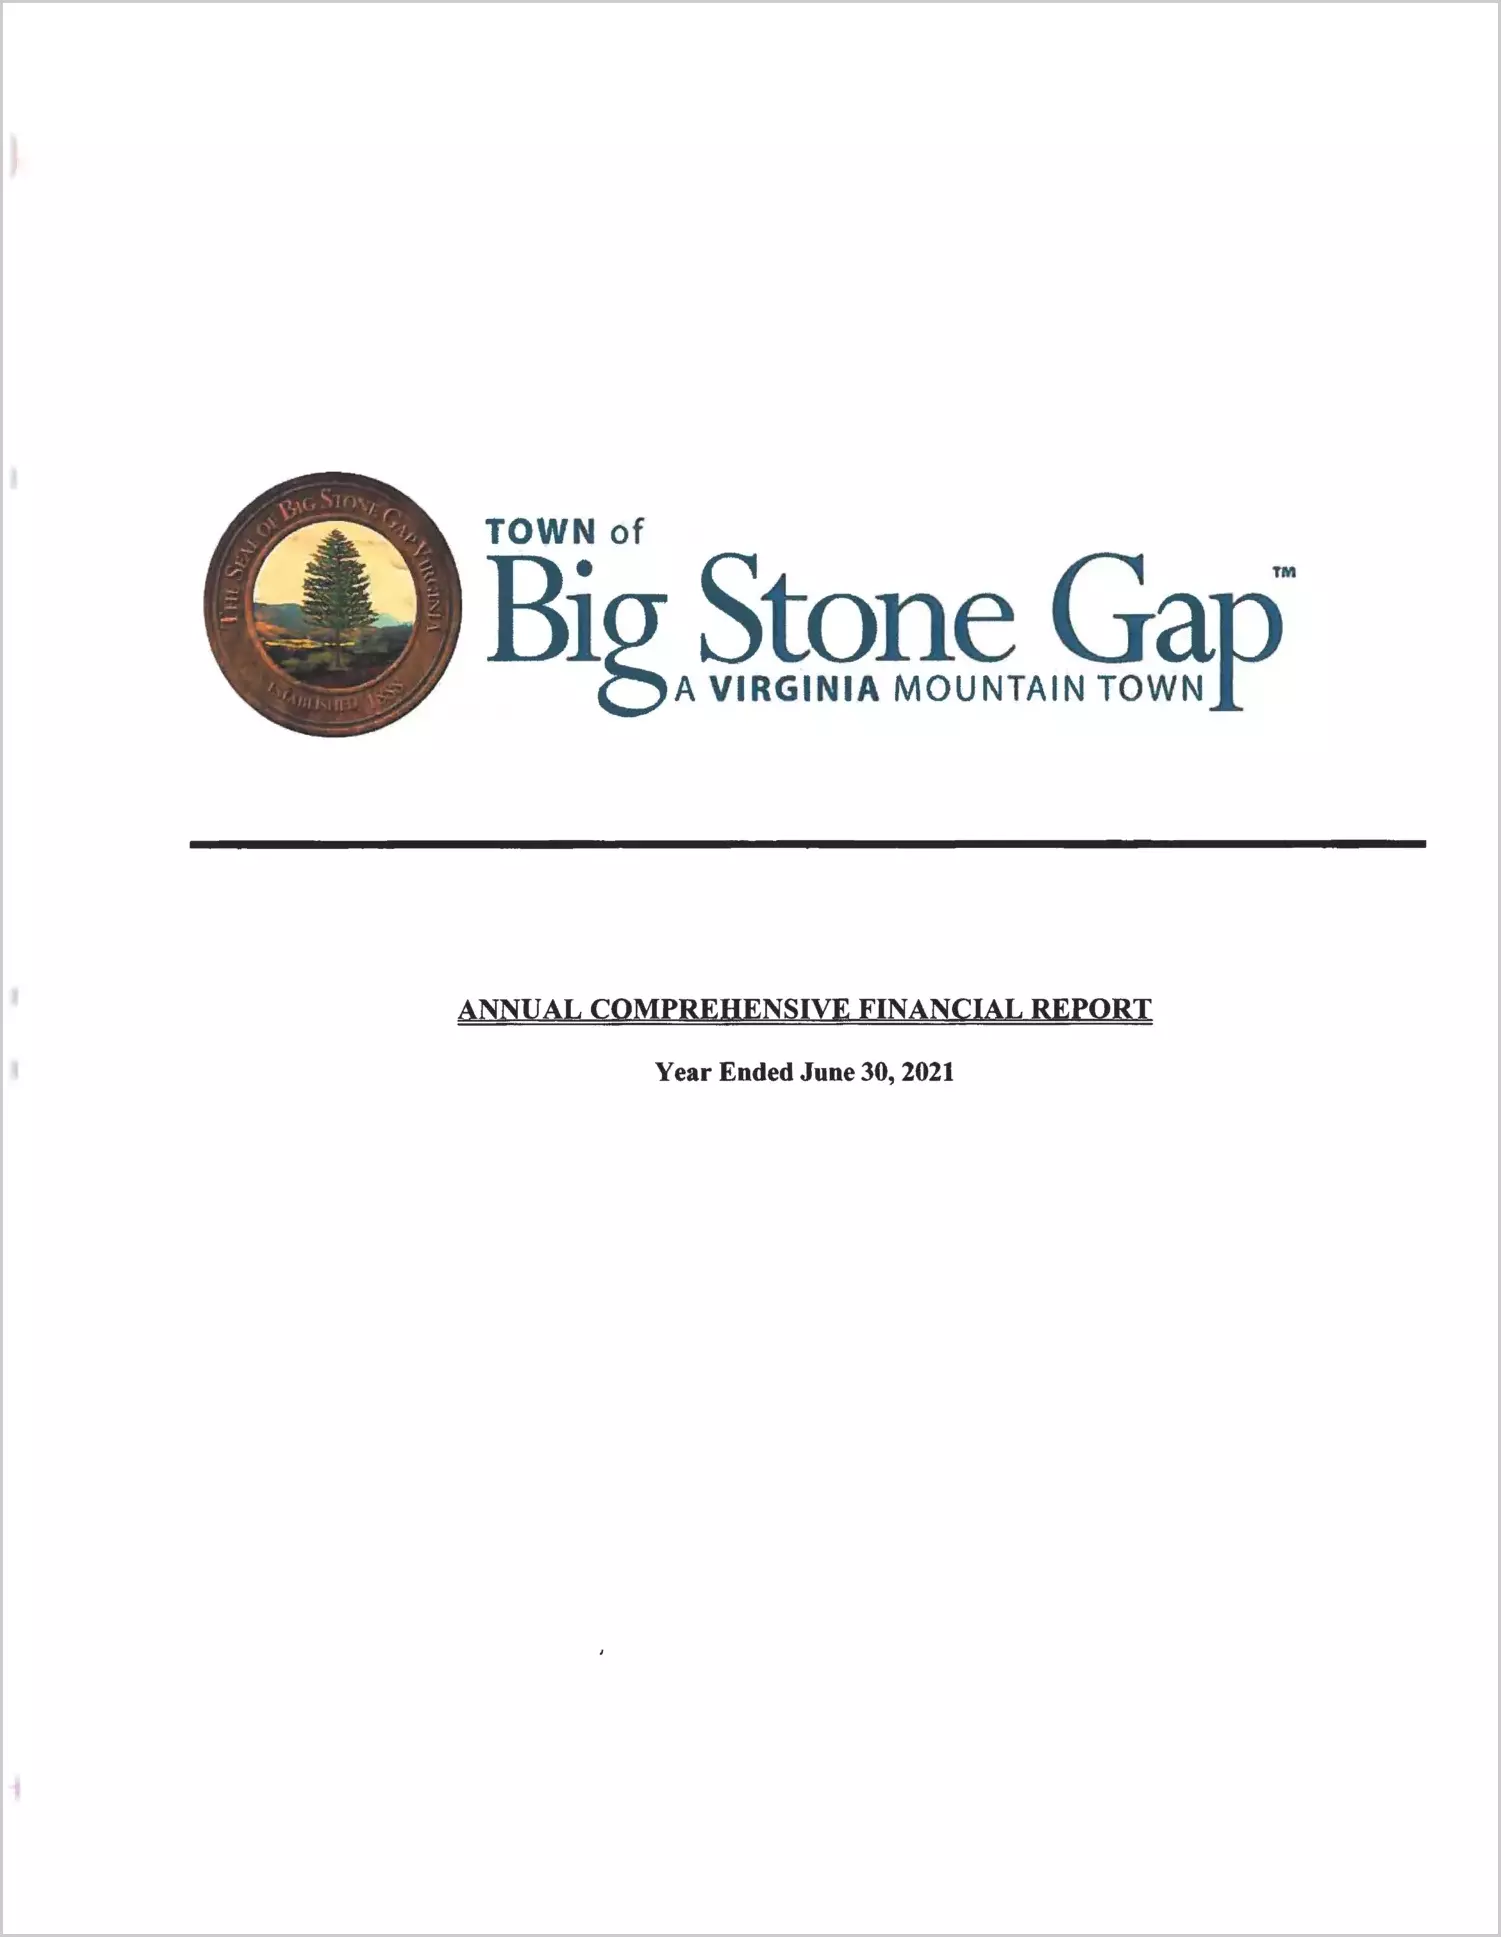 2021 Annual Financial Report for Town of Big Stone Gap